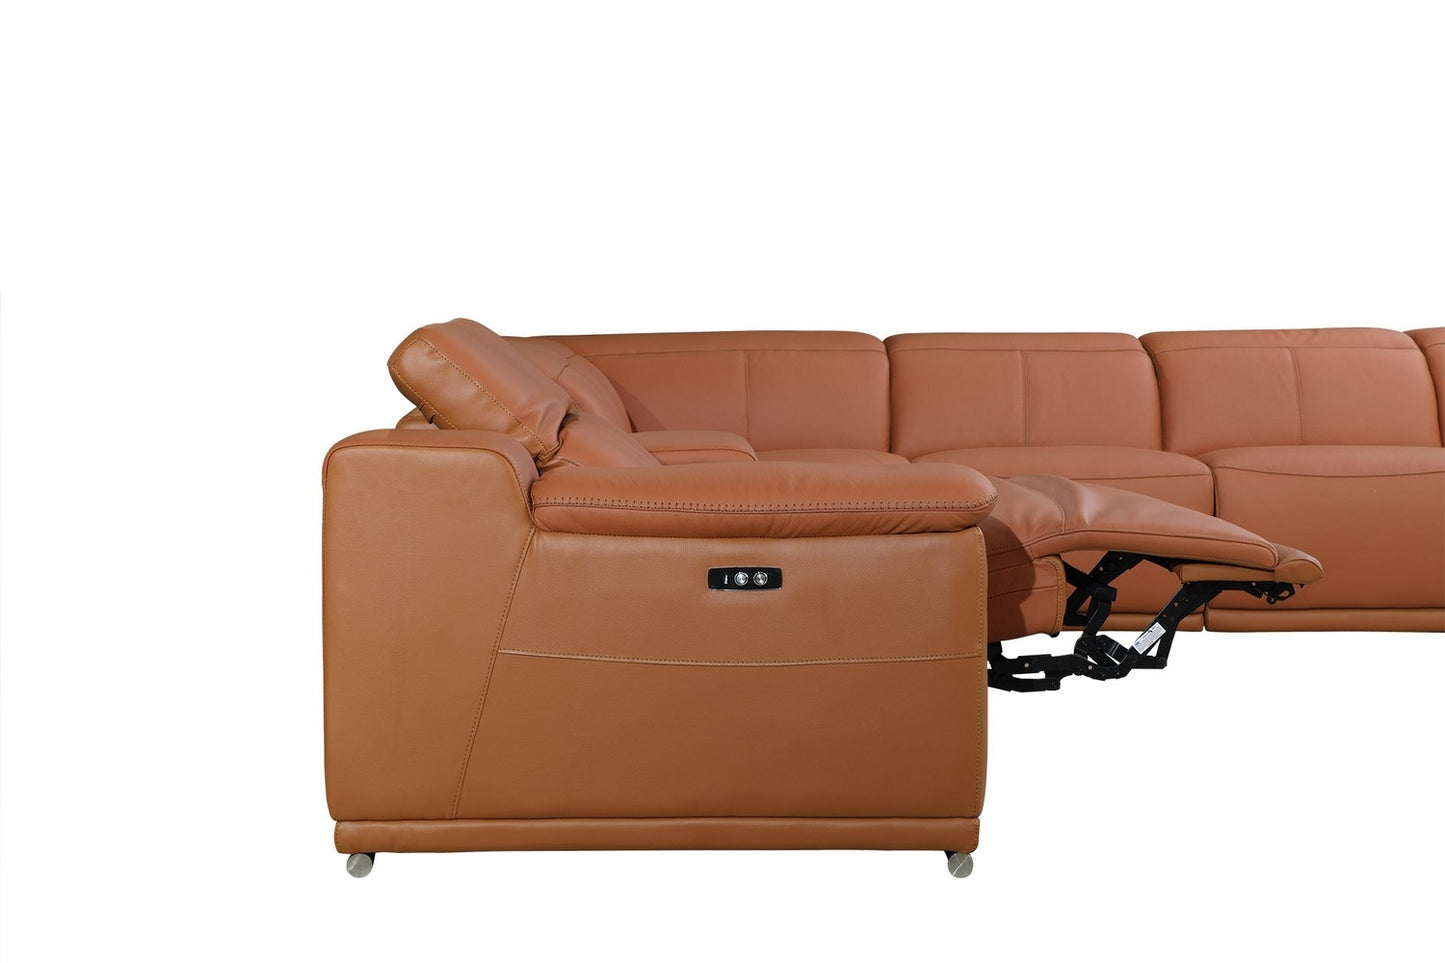 Camel Italian Leather Power Reclining U Shaped Eight Piece Corner Sectional With Console